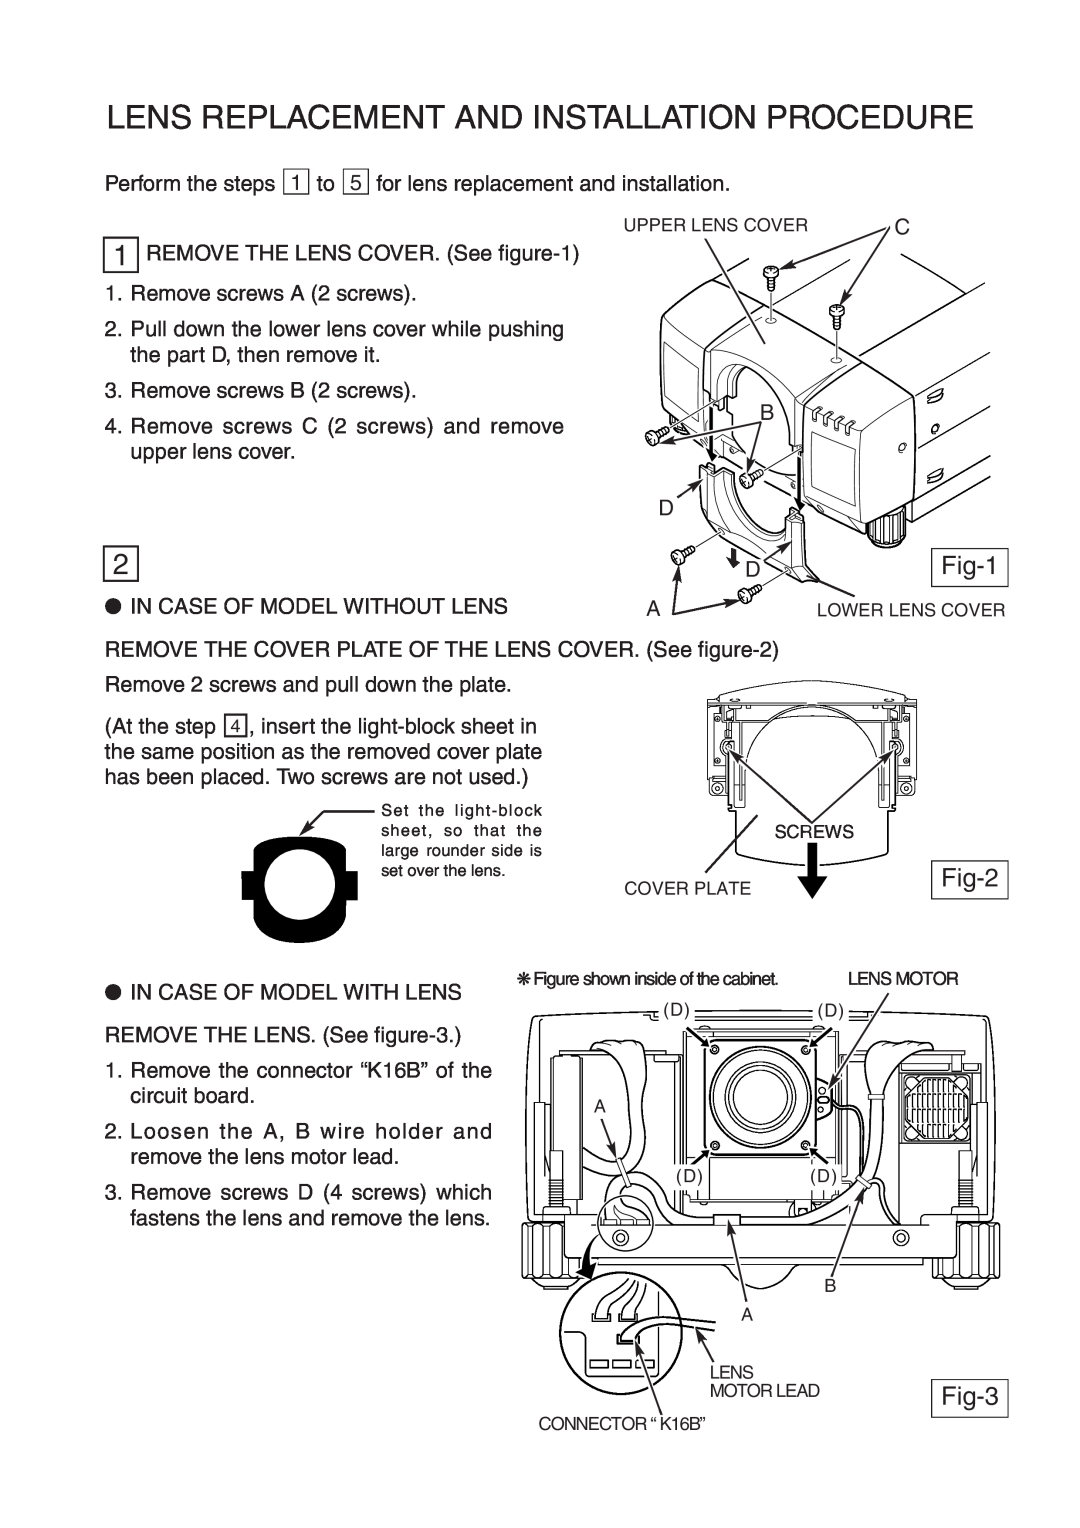 Sanyo LNS-W01Z, LNS-T01Z installation manual Lens Replacement And Installation Procedure, Fig-1, Fig-2, Fig-3 